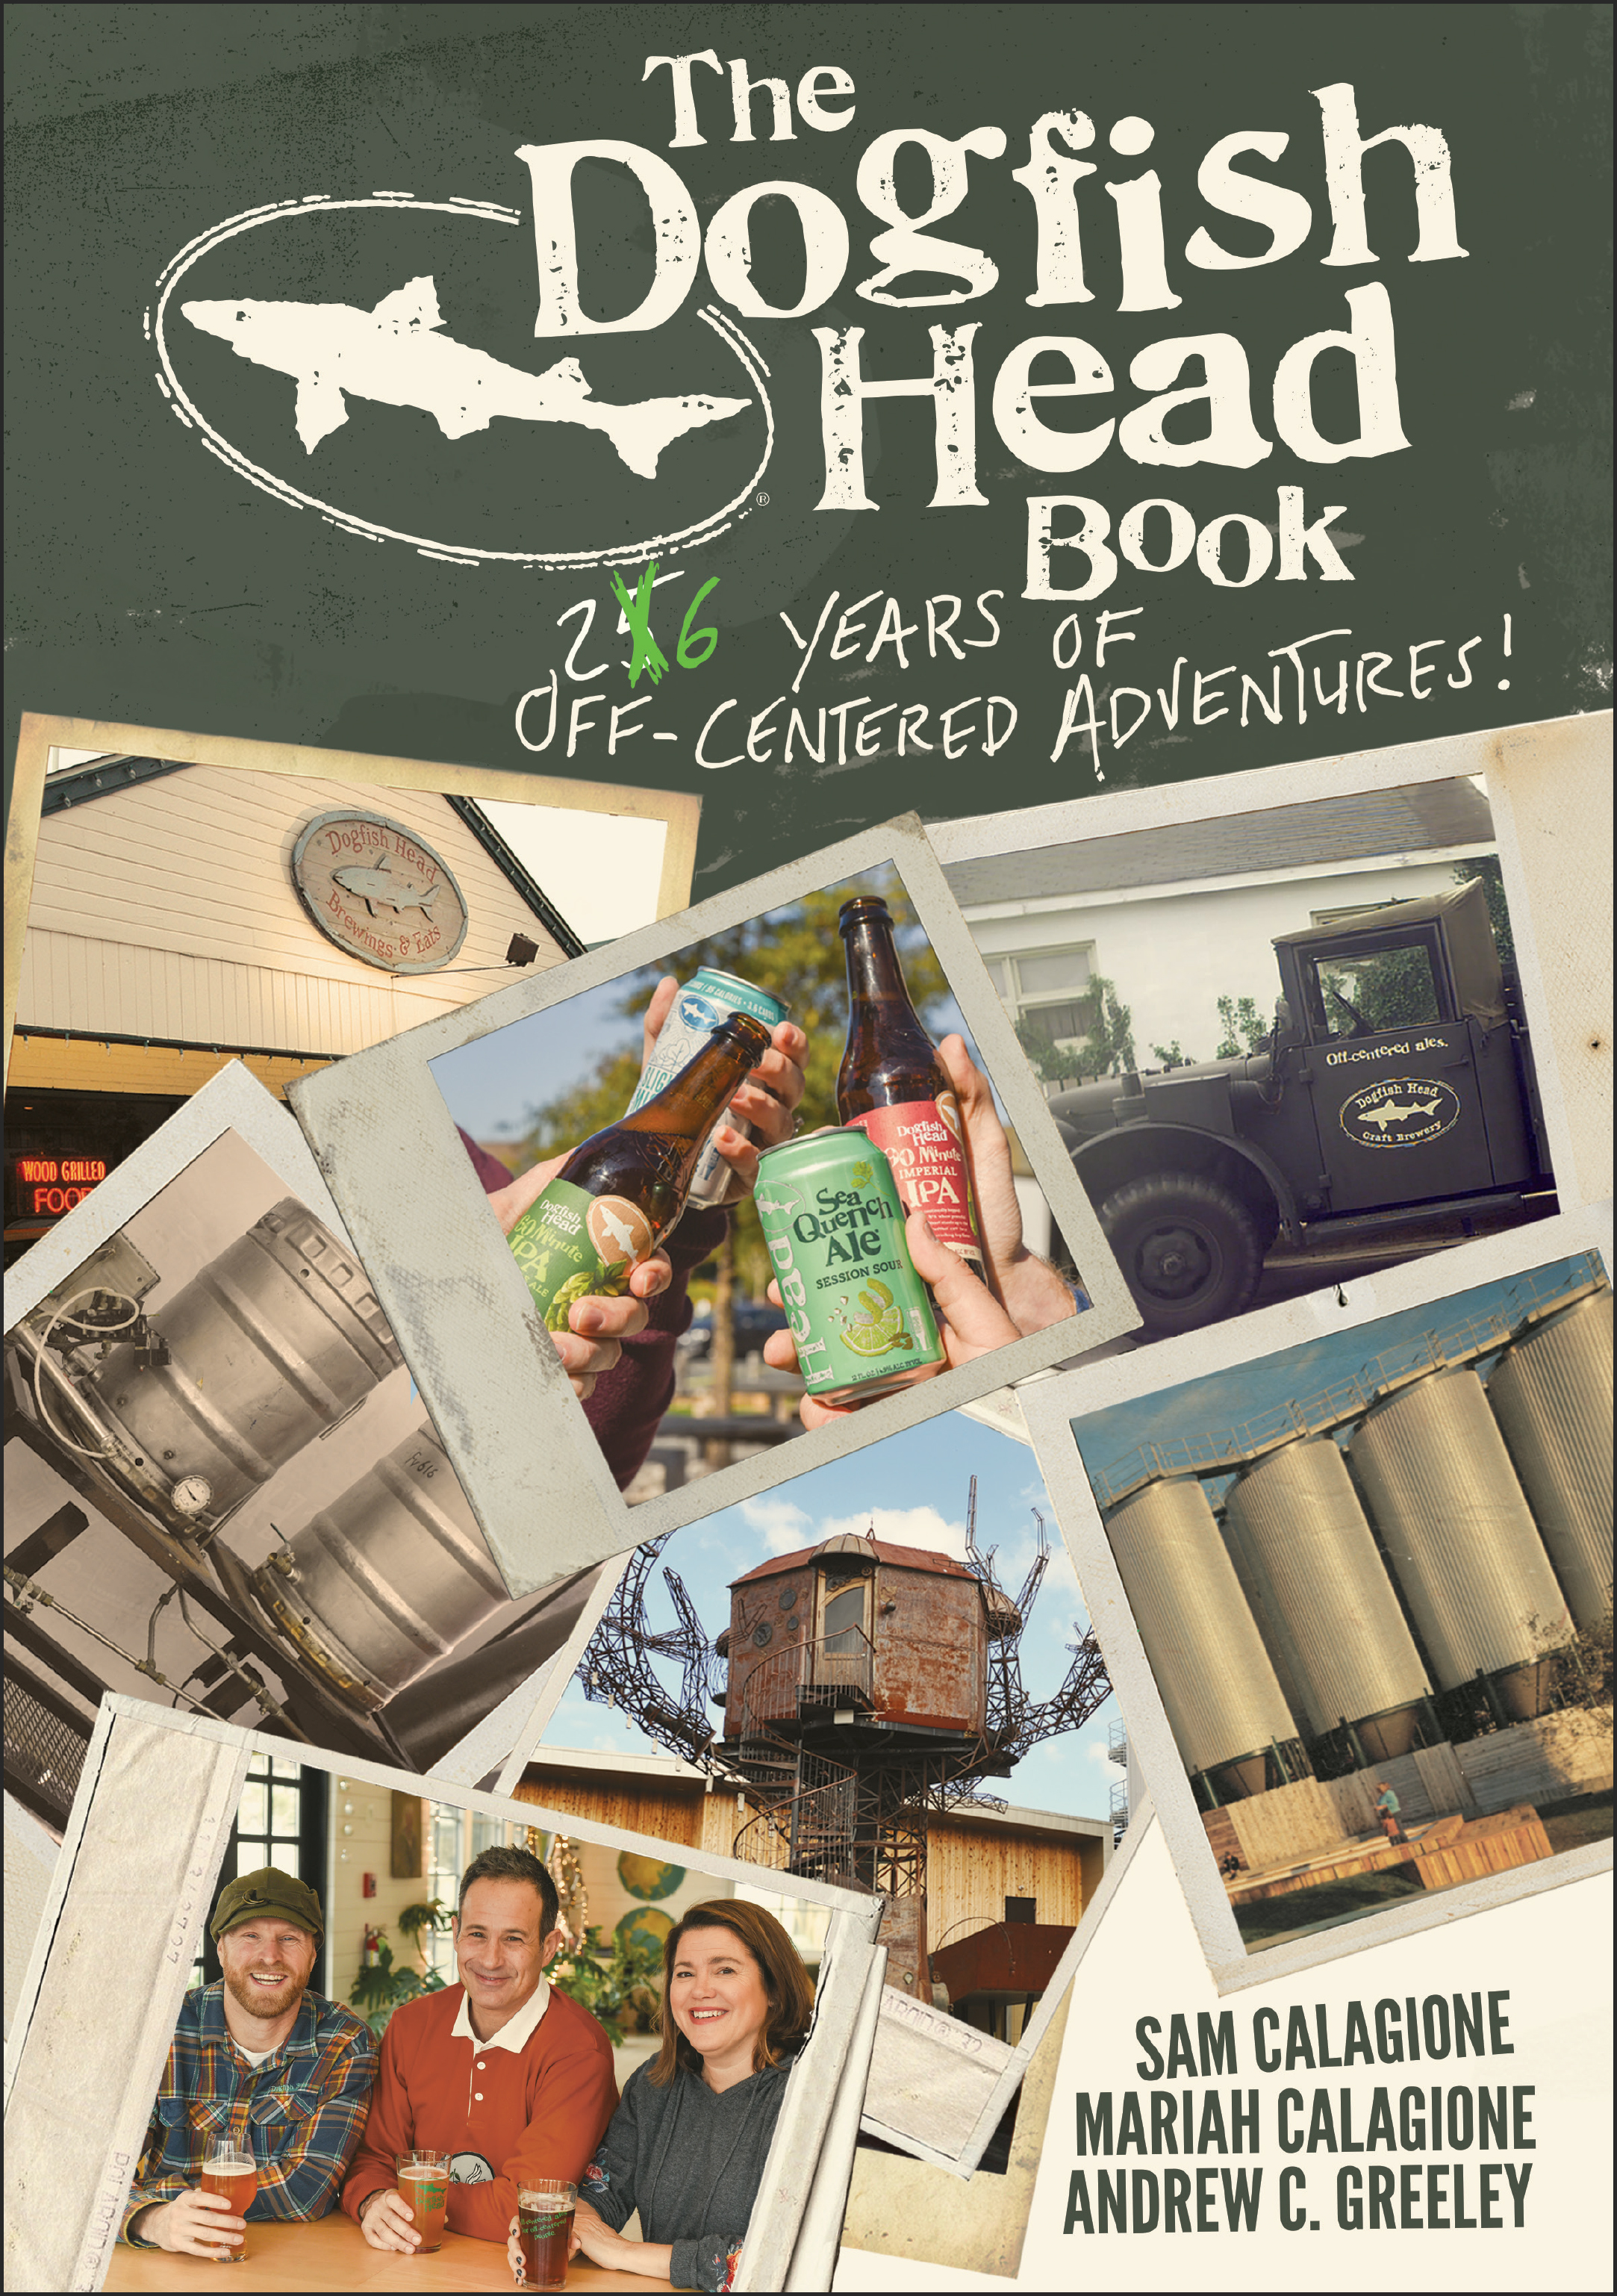 Dogfish Head Book 26 Years of Off-Centered Adventures